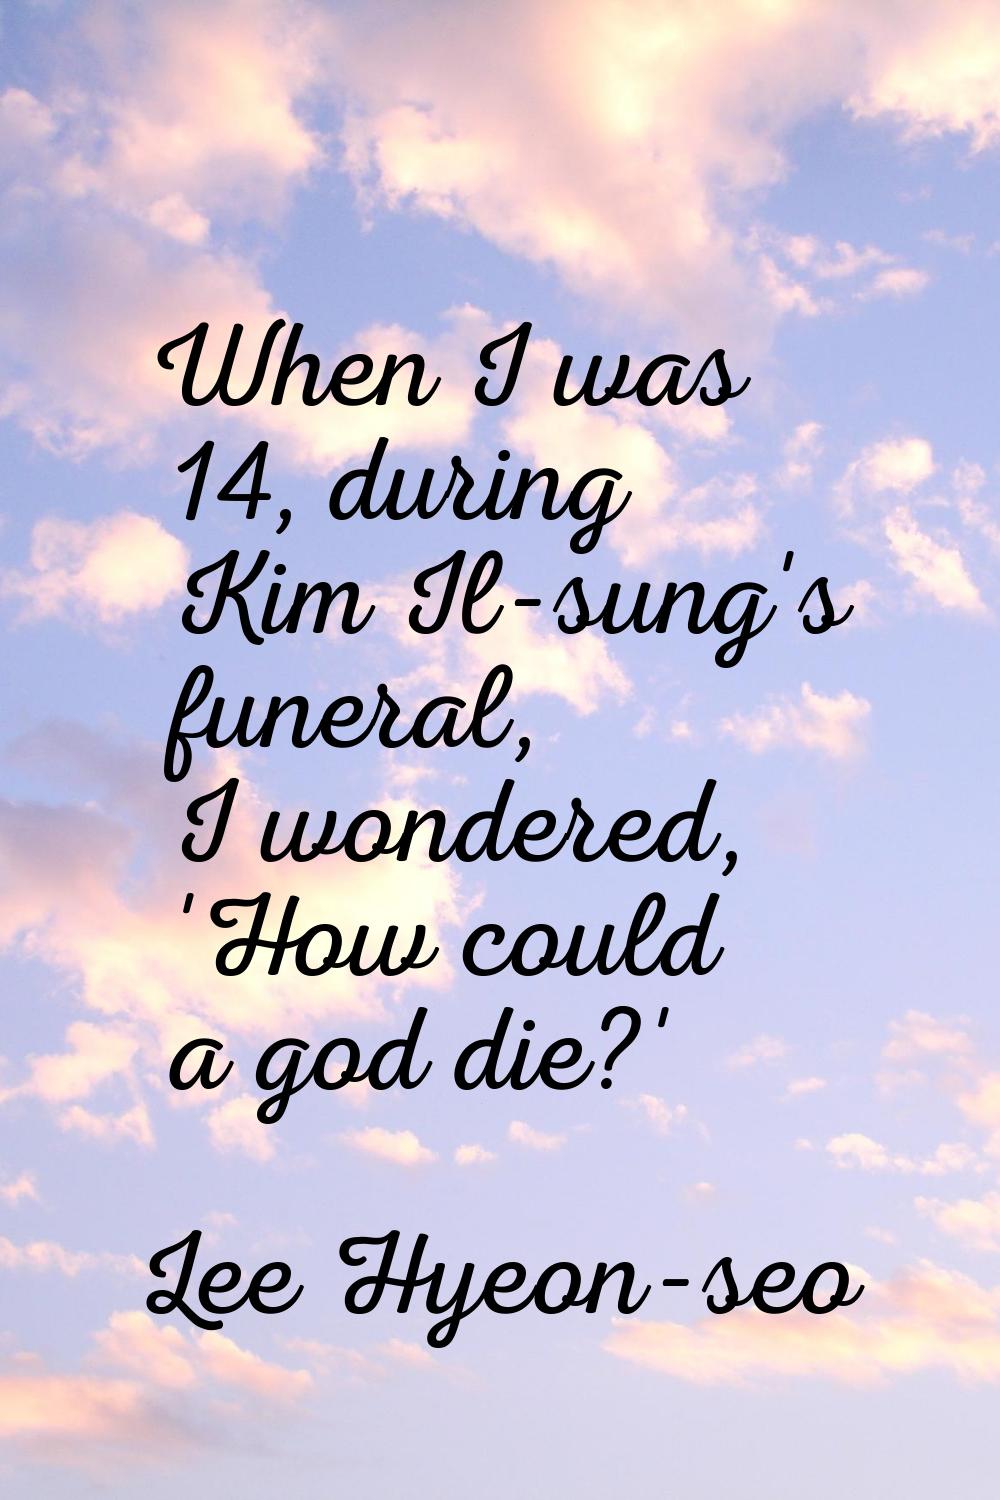 When I was 14, during Kim Il-sung's funeral, I wondered, 'How could a god die?'